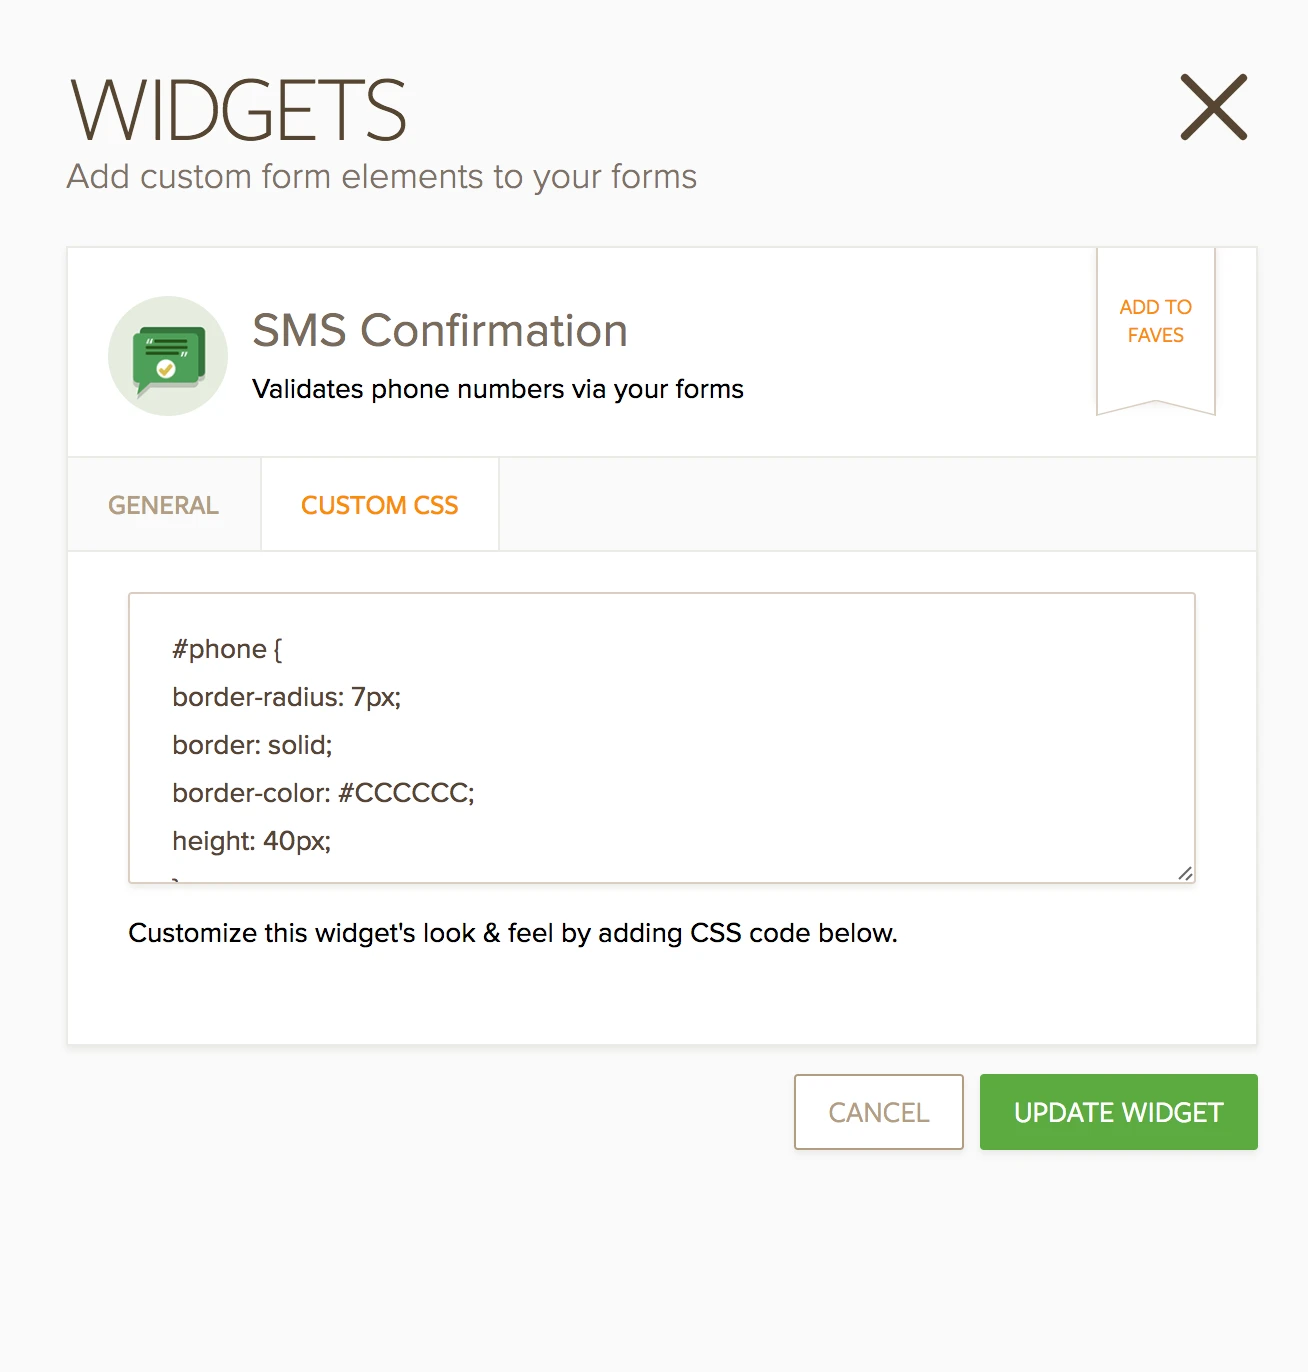 The SMS Confirmation widget does not have any fields to enter credentials during setup Image 2 Screenshot 51